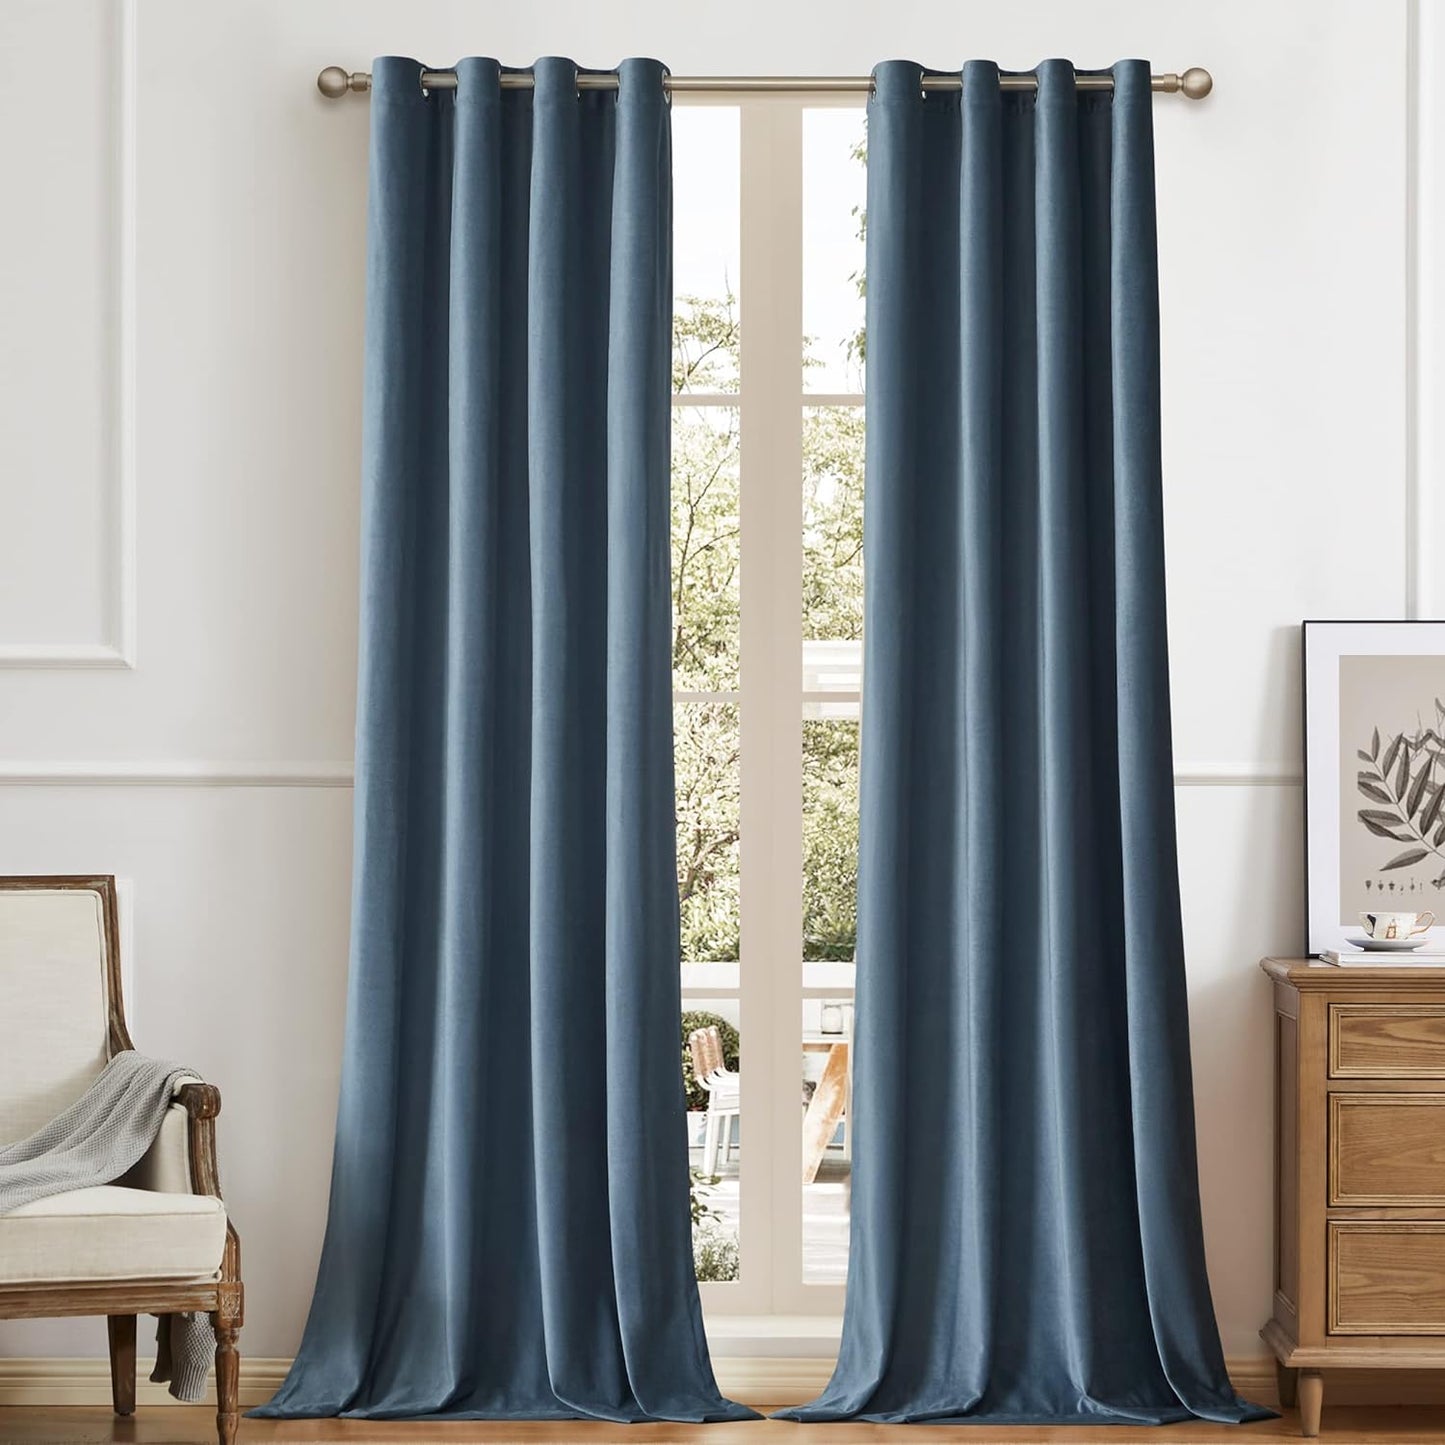 BULBUL Living Room Velvet Window Curtains 84 Inch Length- 2 Panels Hot Pink Blackout Window Drapes Curtains Thermal Insulated Room Darkening Decor Grommet Curtains for Bedroom  BULBUL Stone Blue 52"W X 108"L 